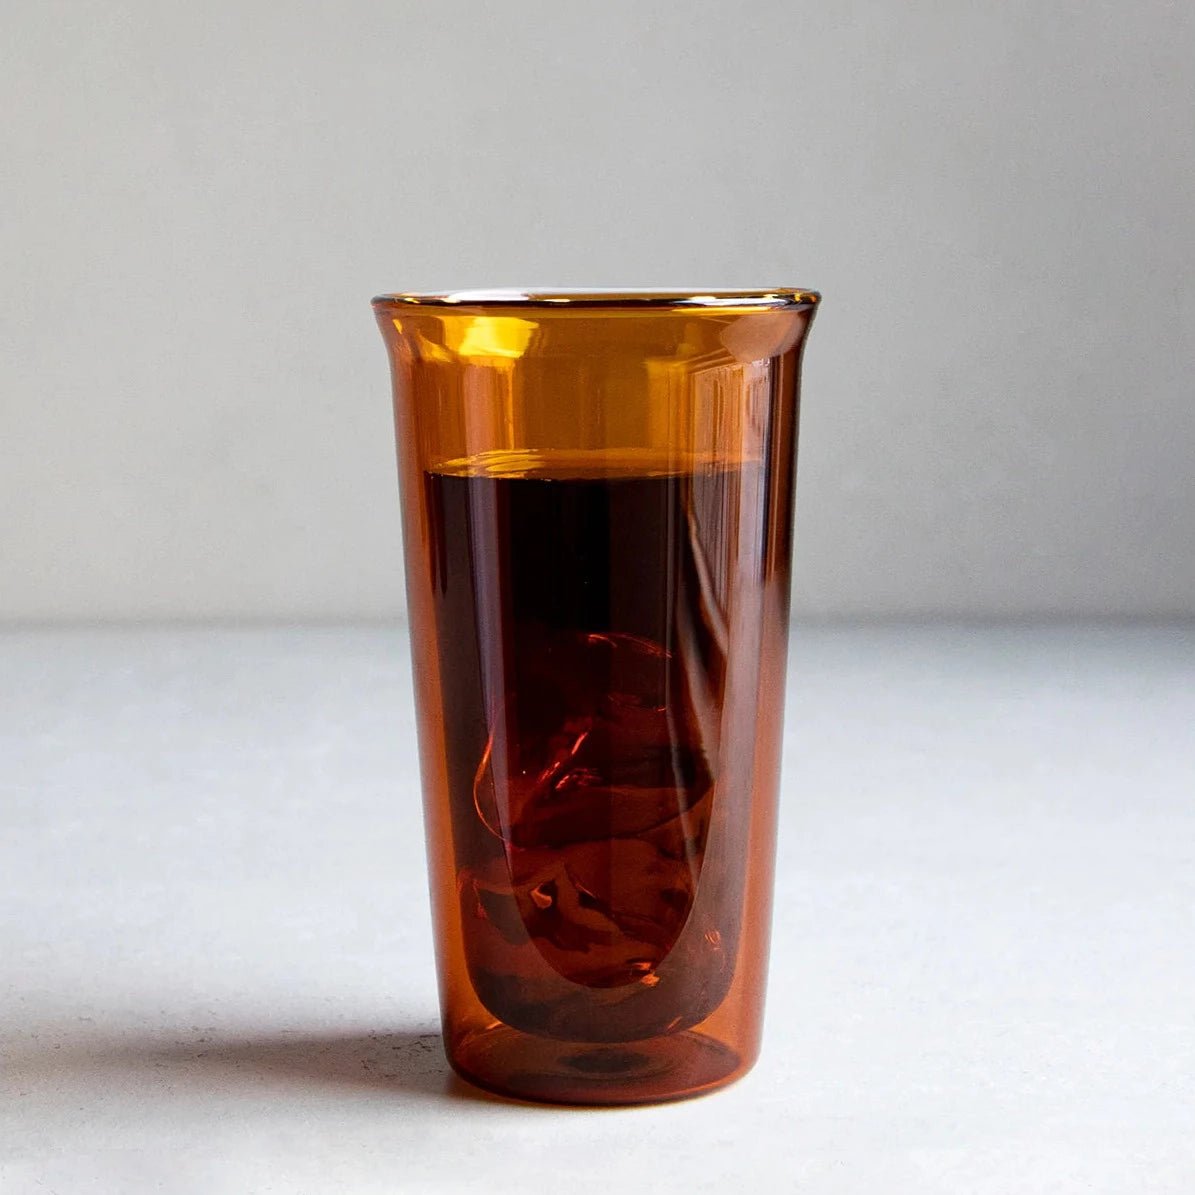 https://cdn.shopify.com/s/files/1/0275/1876/3088/products/cast-amber-double-wall-glass-12oz-234803_1445x.webp?v=1666388978